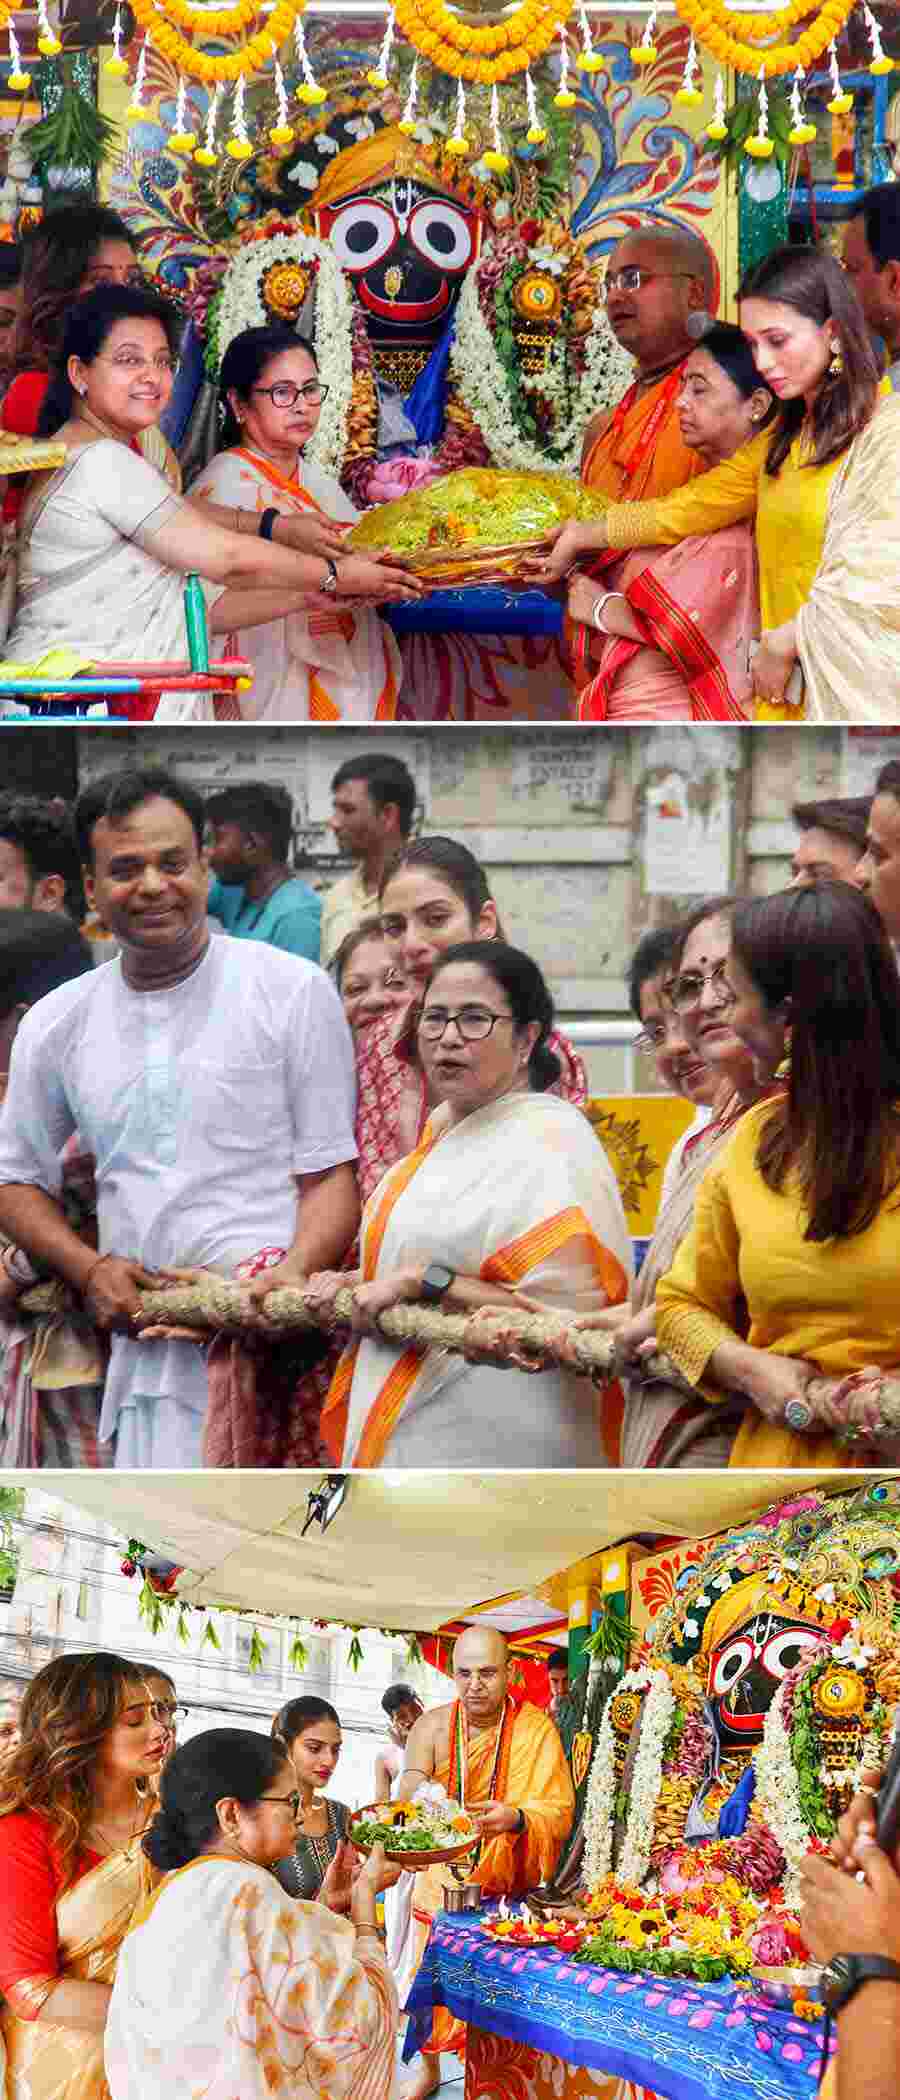 Chief minister Mamata Banerjee along with eminent Odissi dancer Dona Ganguly, TMC MP Mimi Chakraborty and other dignitaries at the procession 